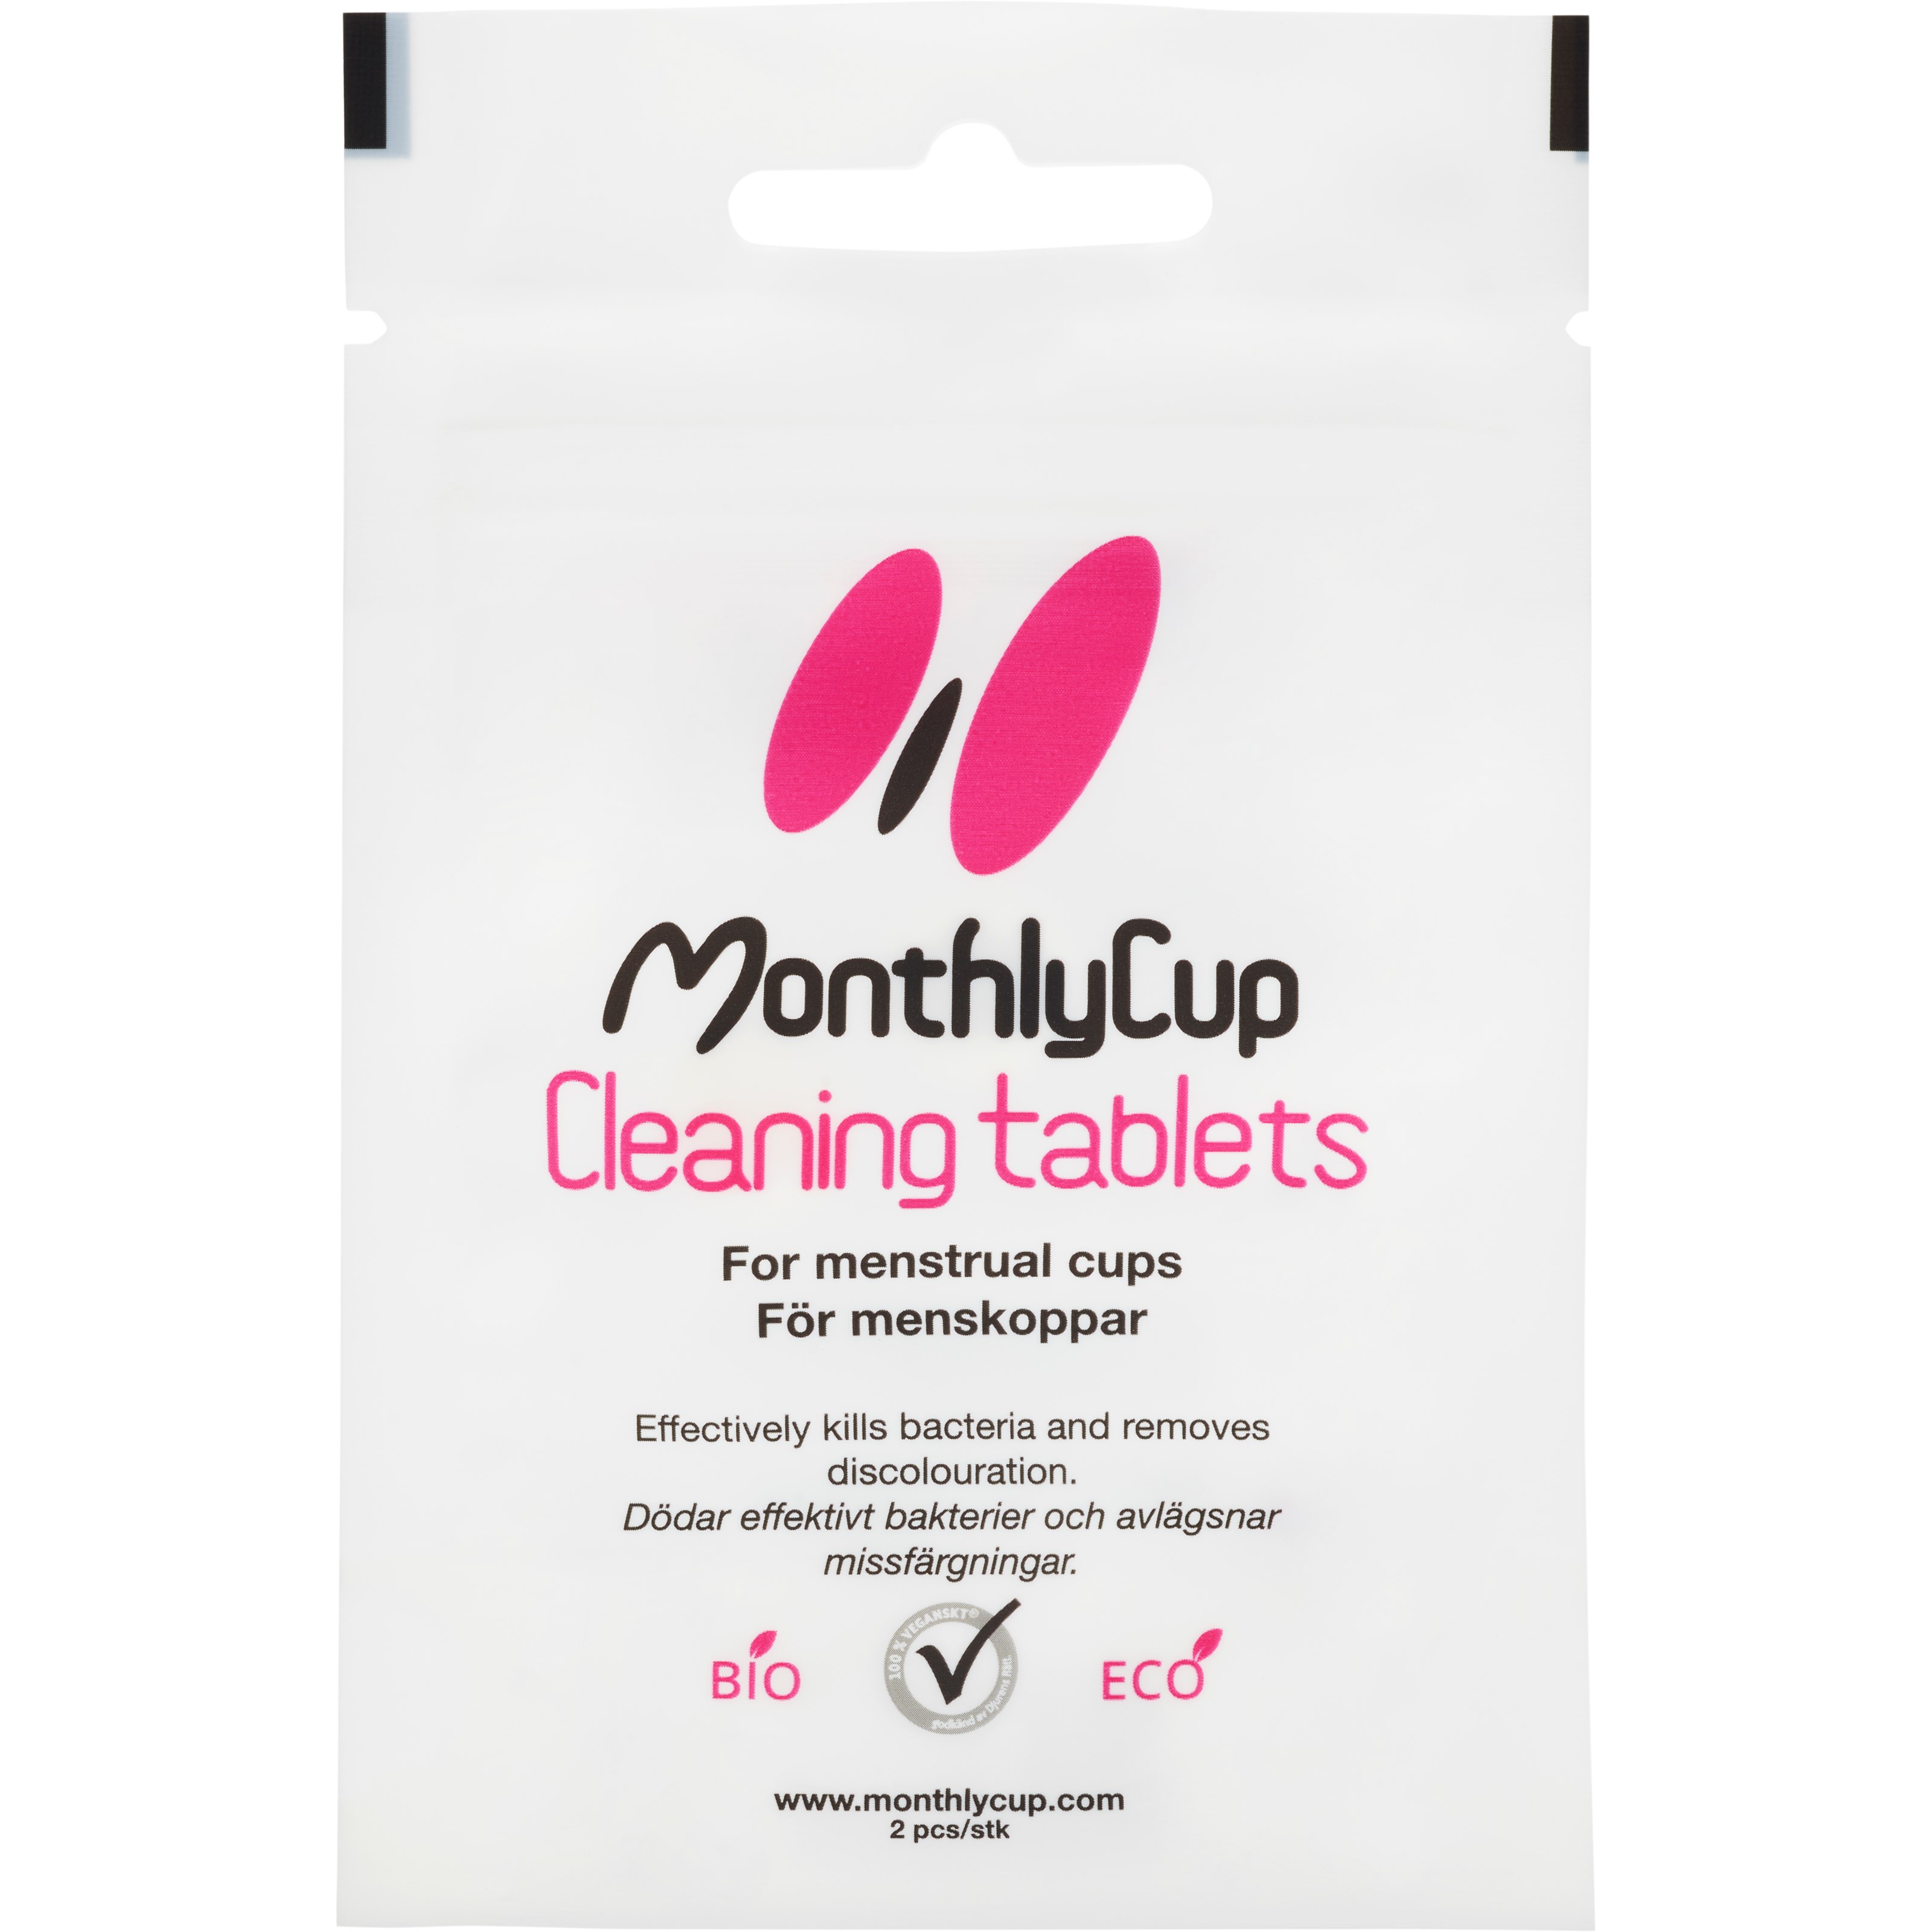 Läs mer om MonthlyCup Cleaning tablets